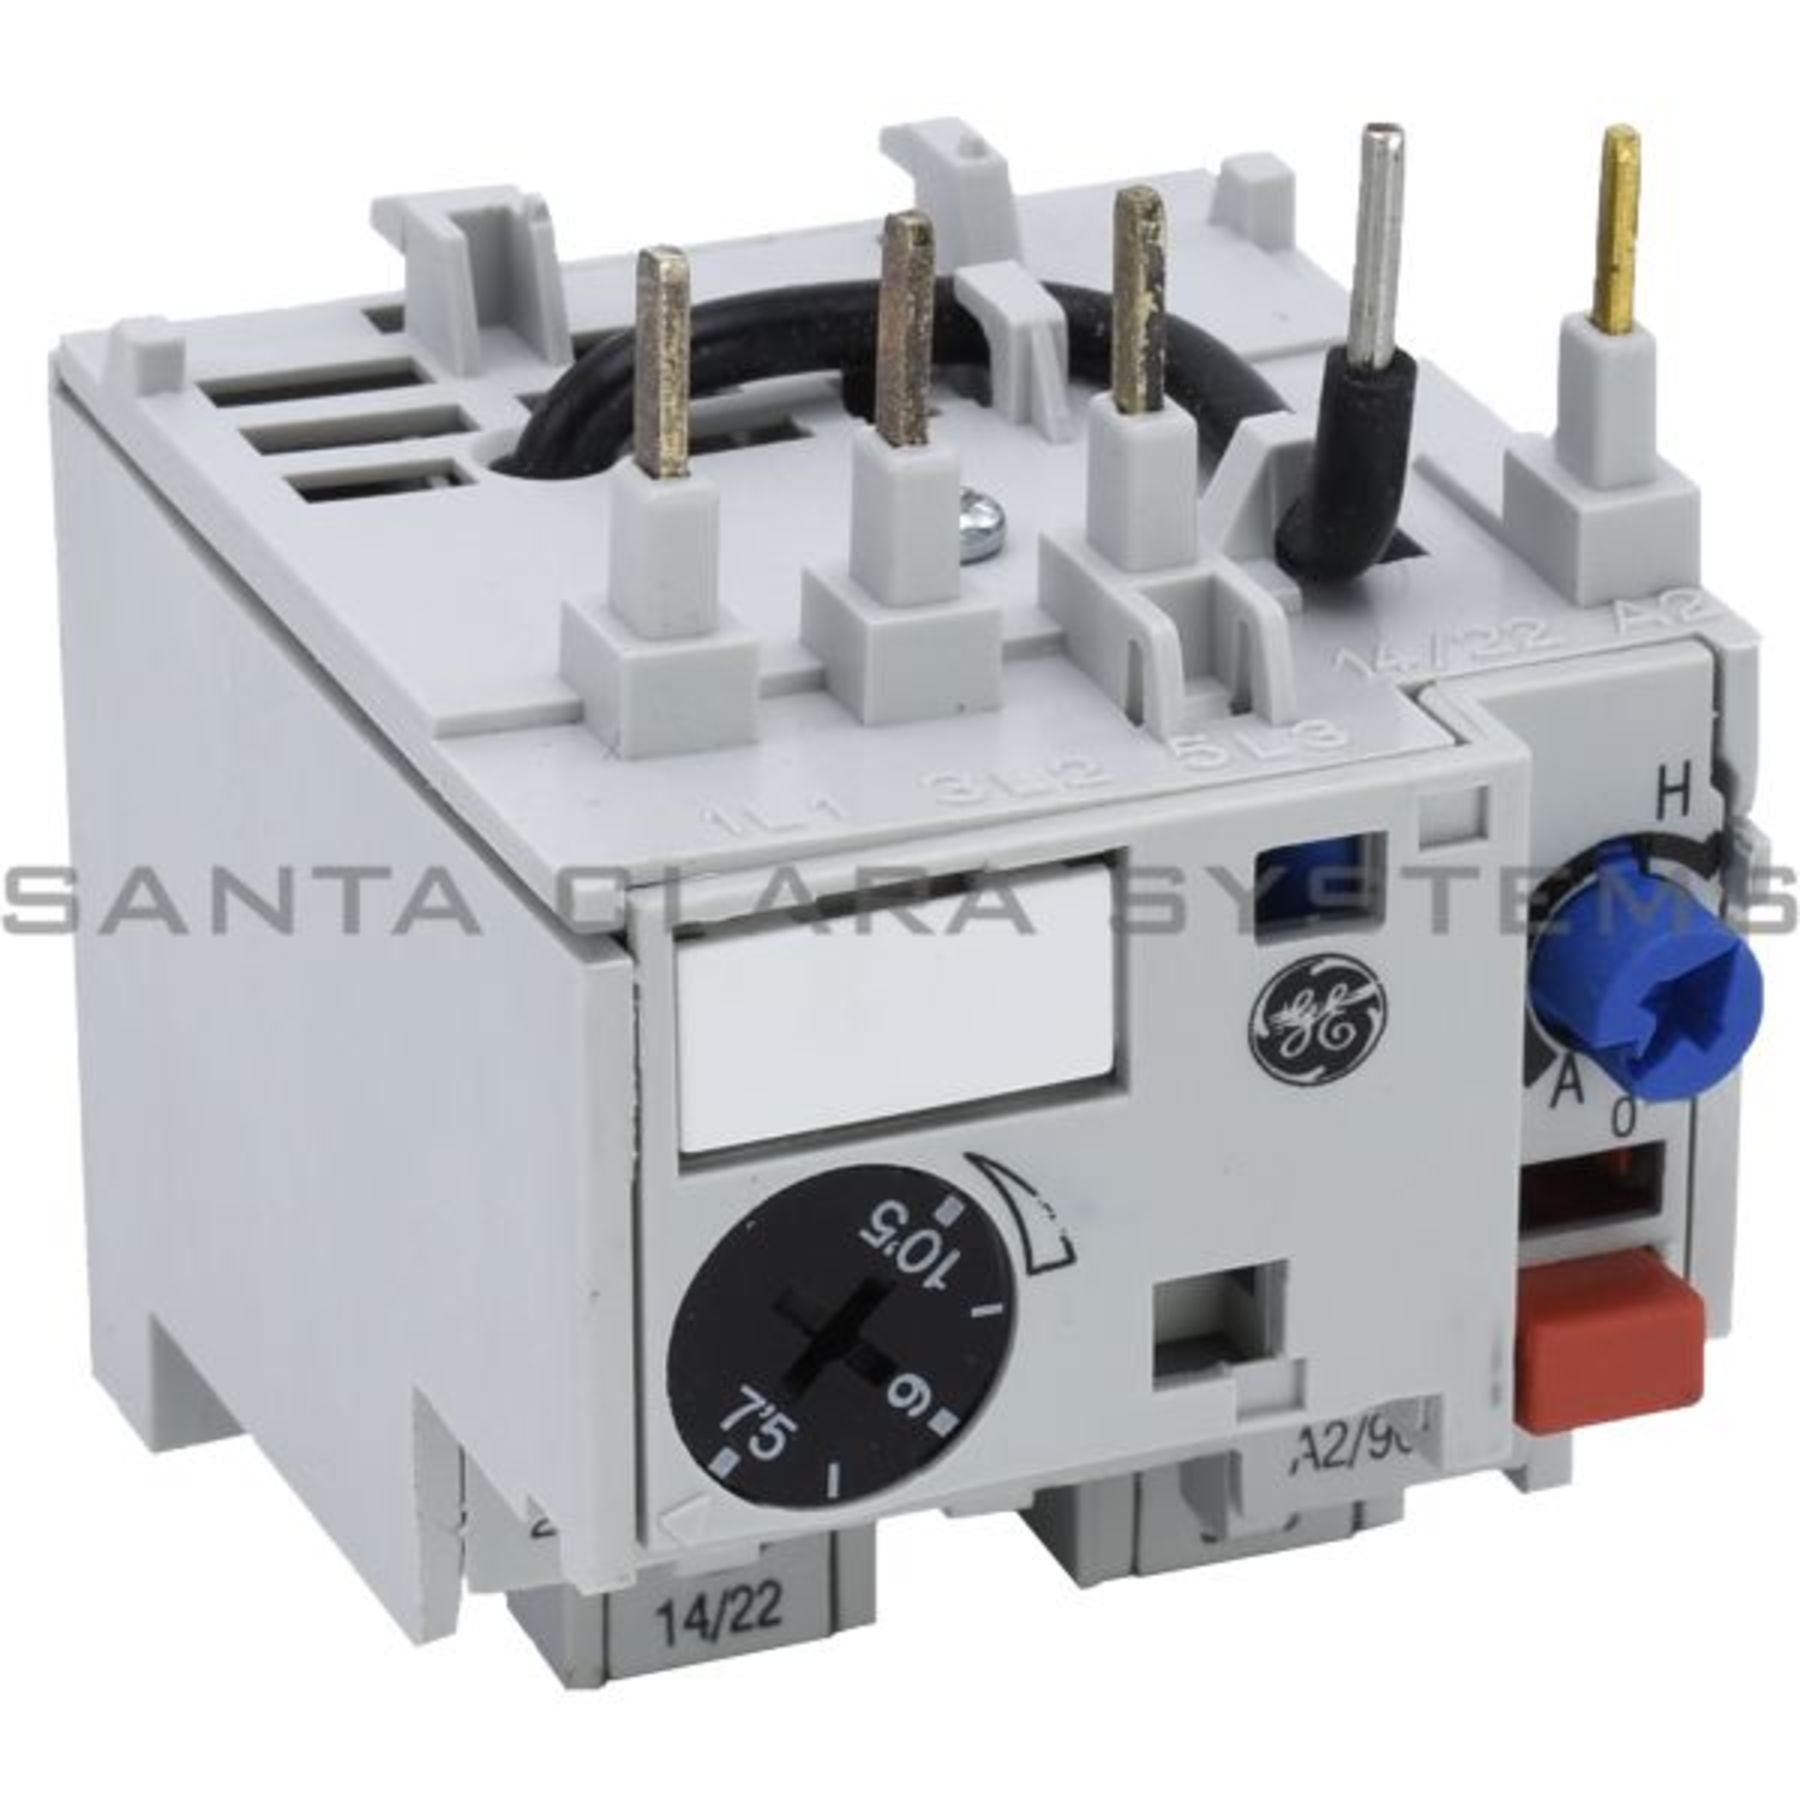 General Electric GE MT03N Overload Relay for sale online 